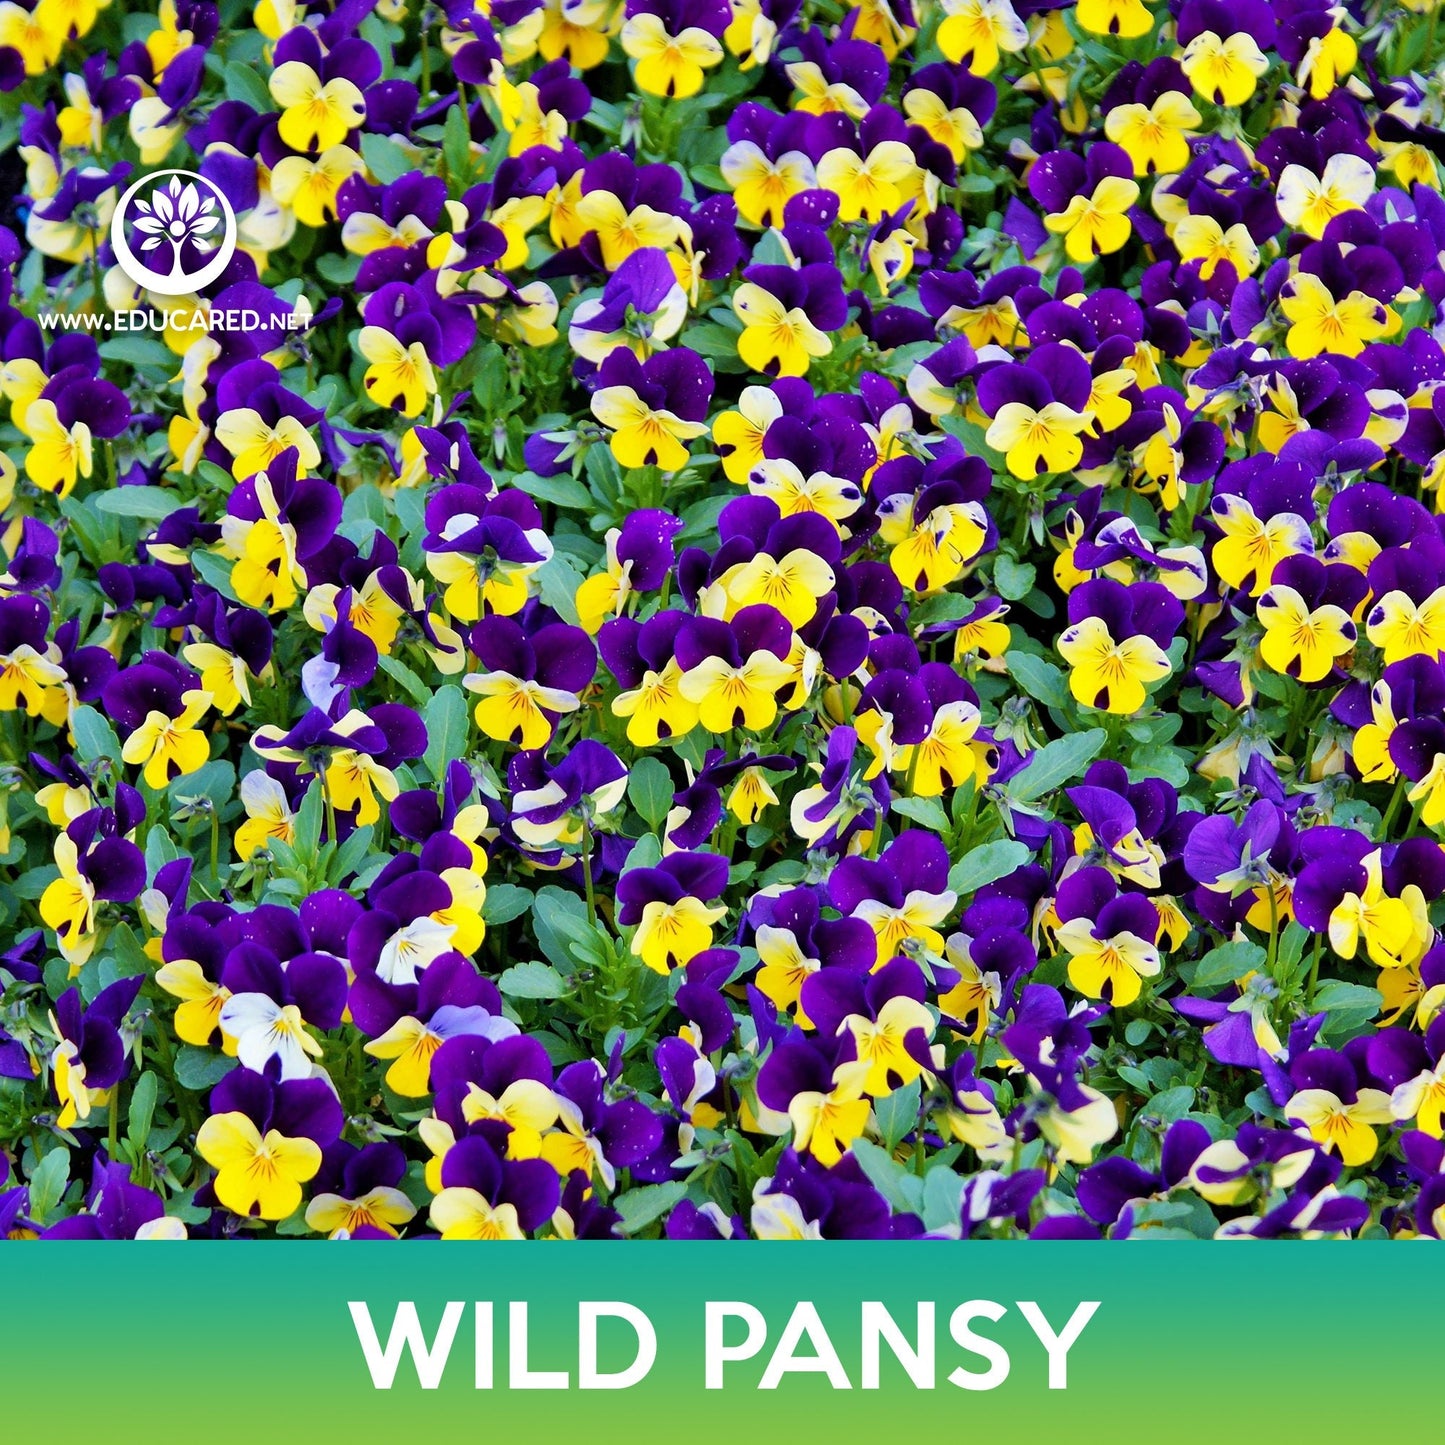 Wild Pansy Flower Seeds, Johnny Jump Up, Viola tricolor